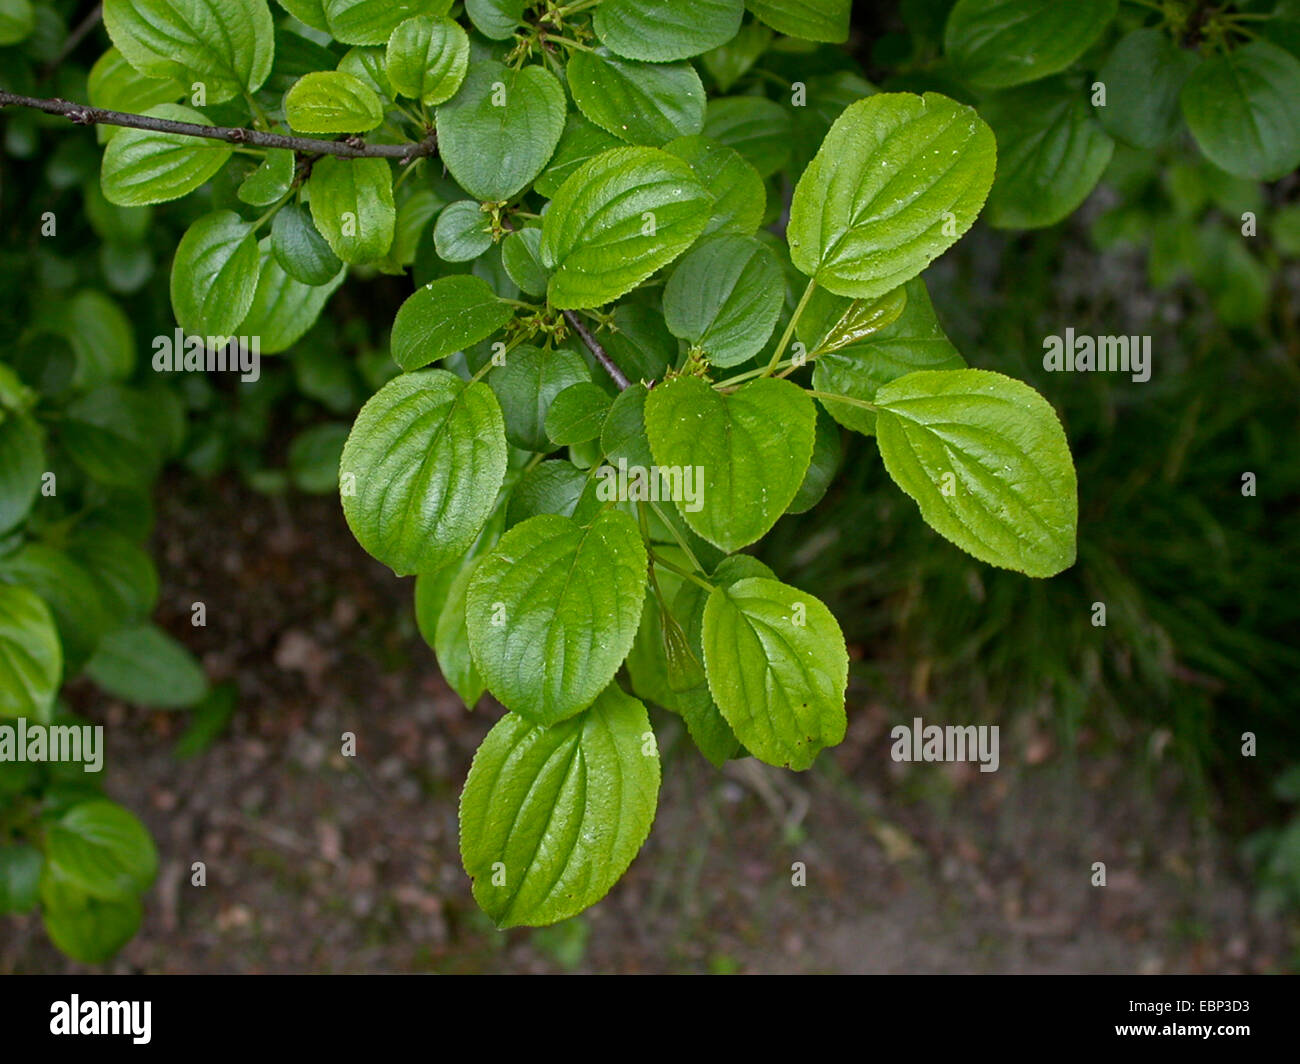 common buckthorn (Rhamnus catharticus), blooming branch, Germany Stock Photo